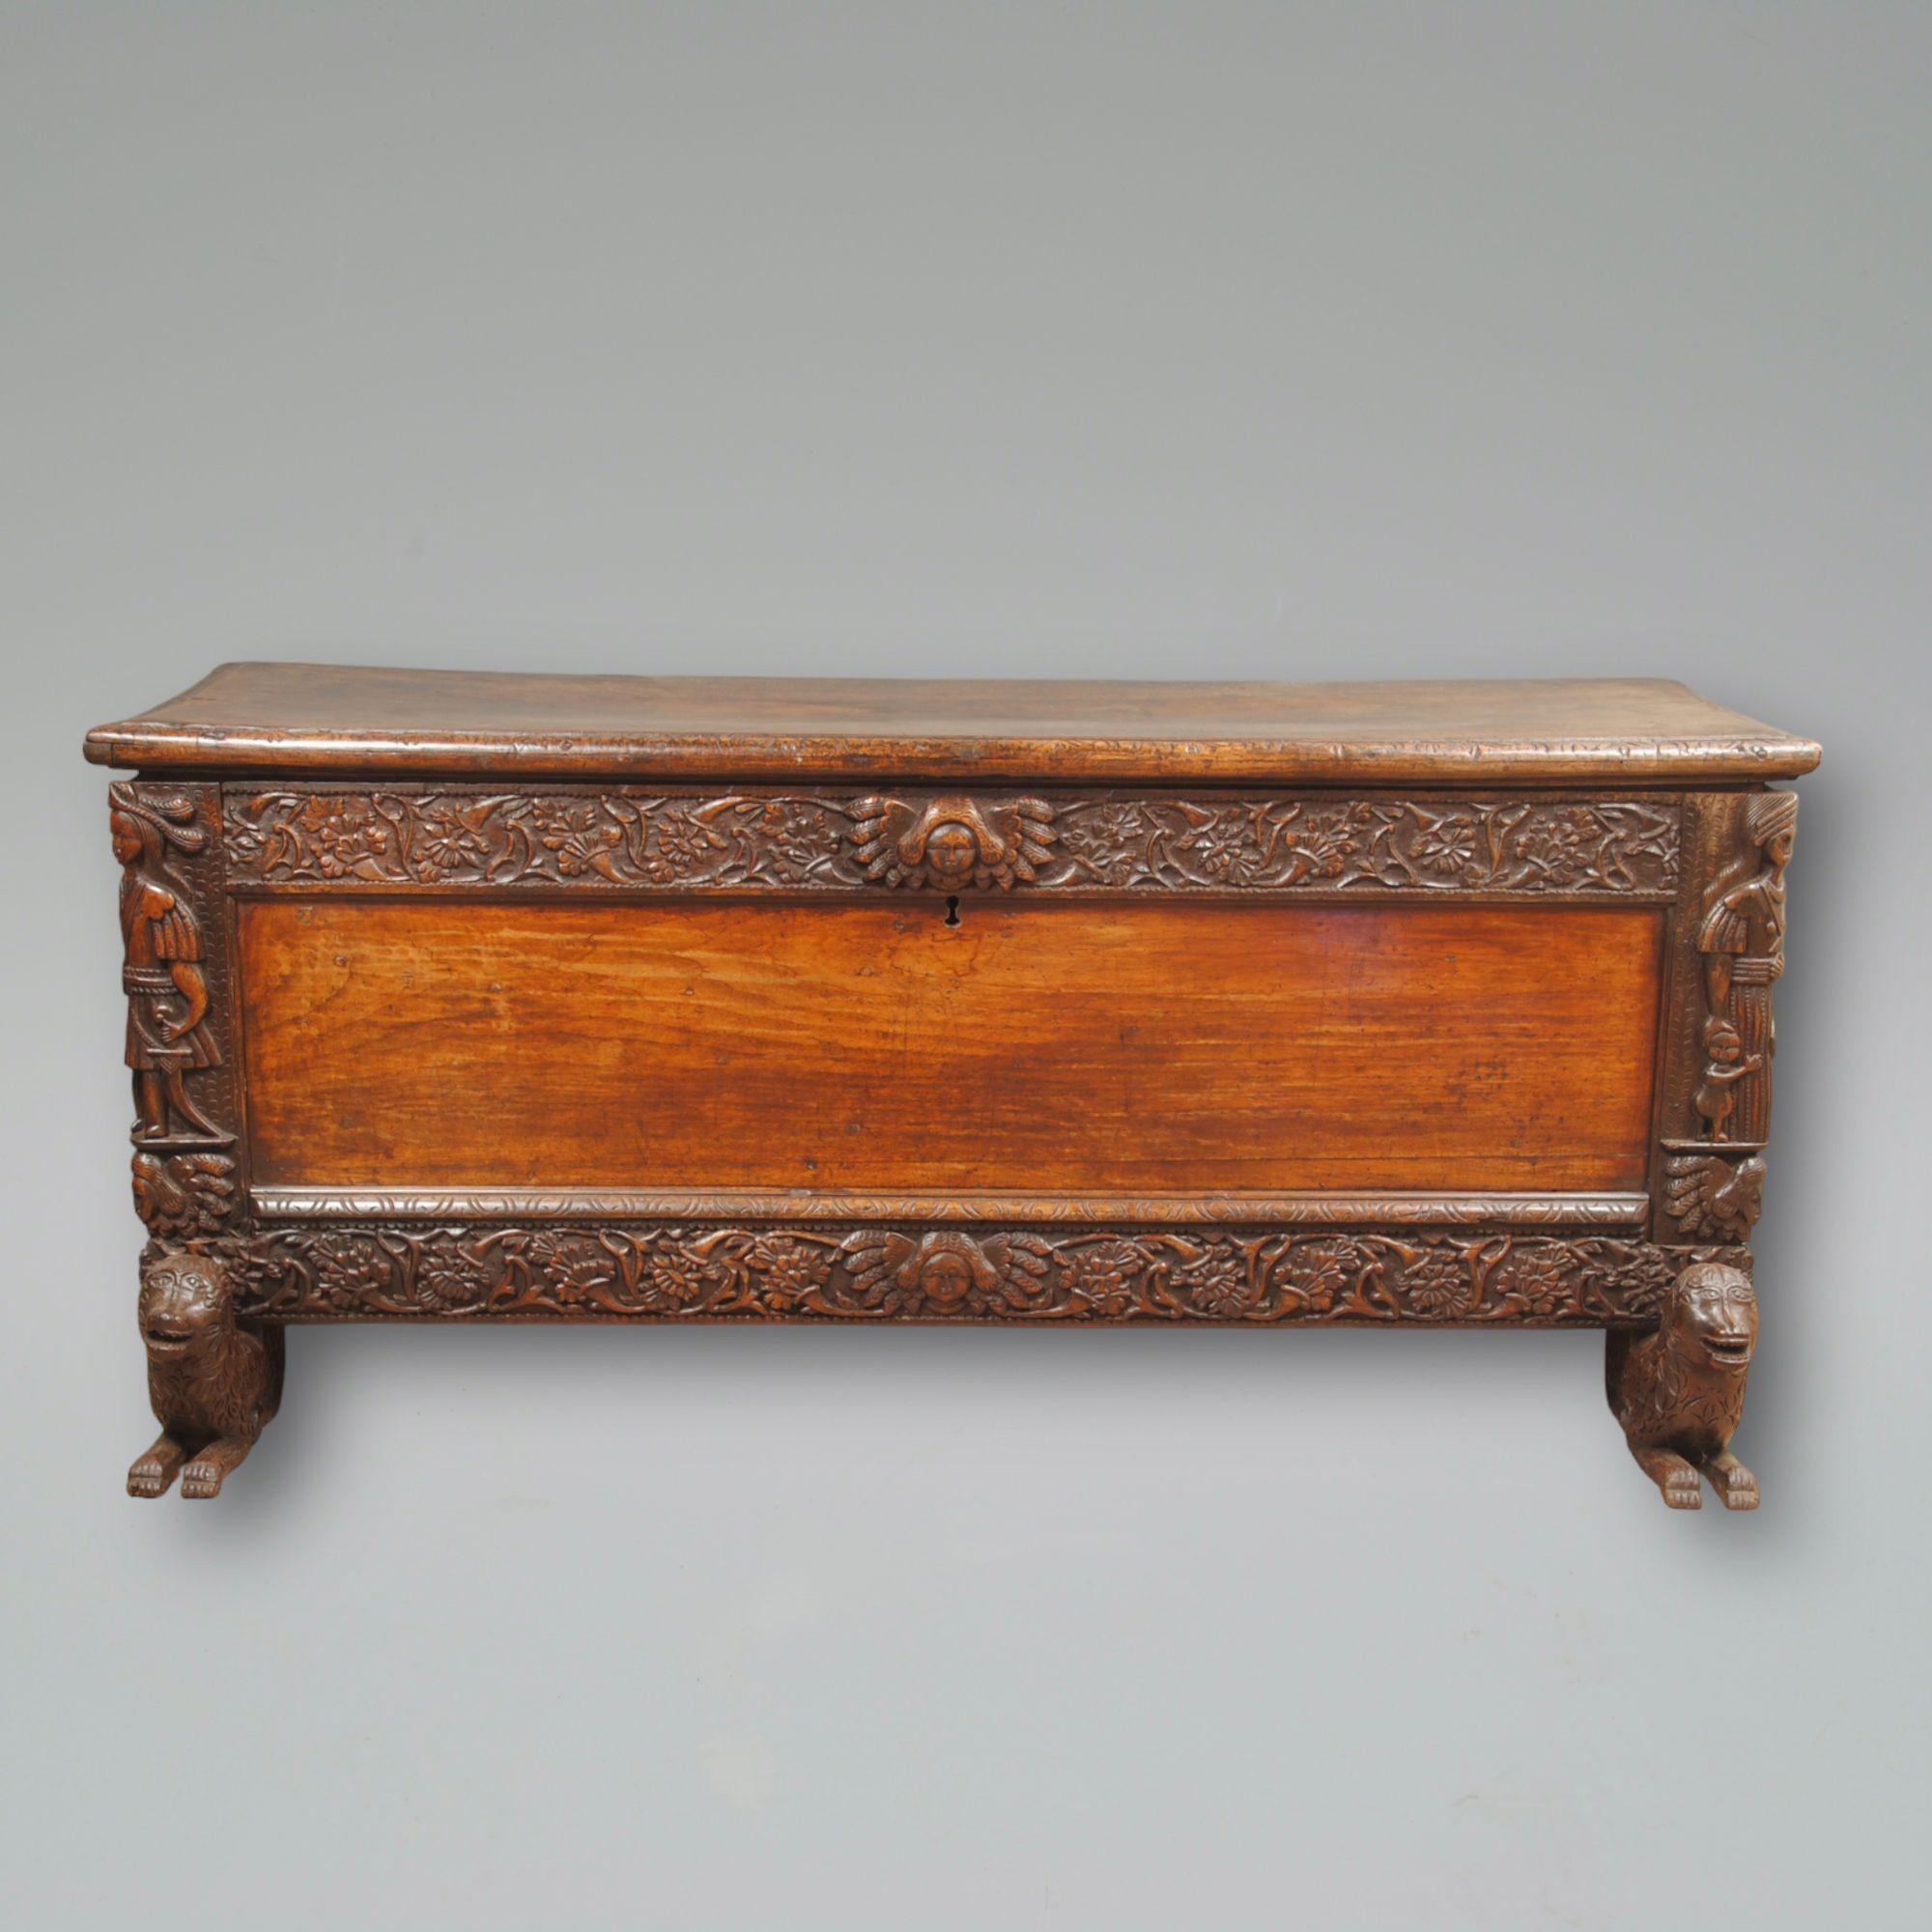 A 17th century carved South American hardwood coffer with caryatids to the sides showing stylized figures of Indians
Raised on carved recumbent animal feet.
Circa 1680